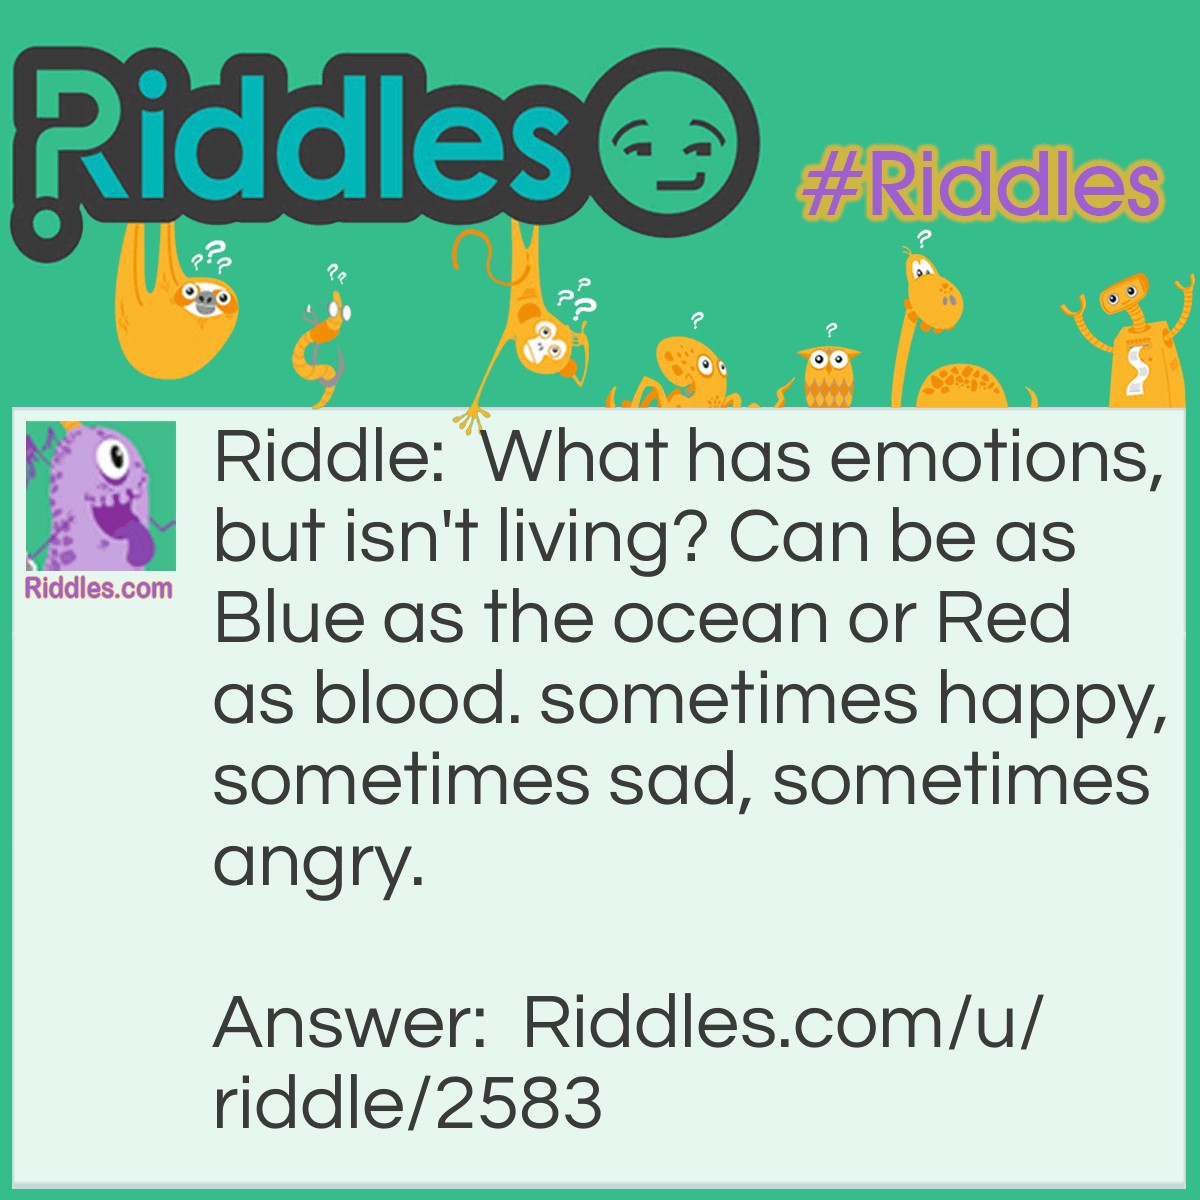 Riddle: What has emotions, but isn't living? Can be as Blue as the ocean or Red as blood. sometimes happy, sometimes sad, sometimes angry. Answer: A mood ring.